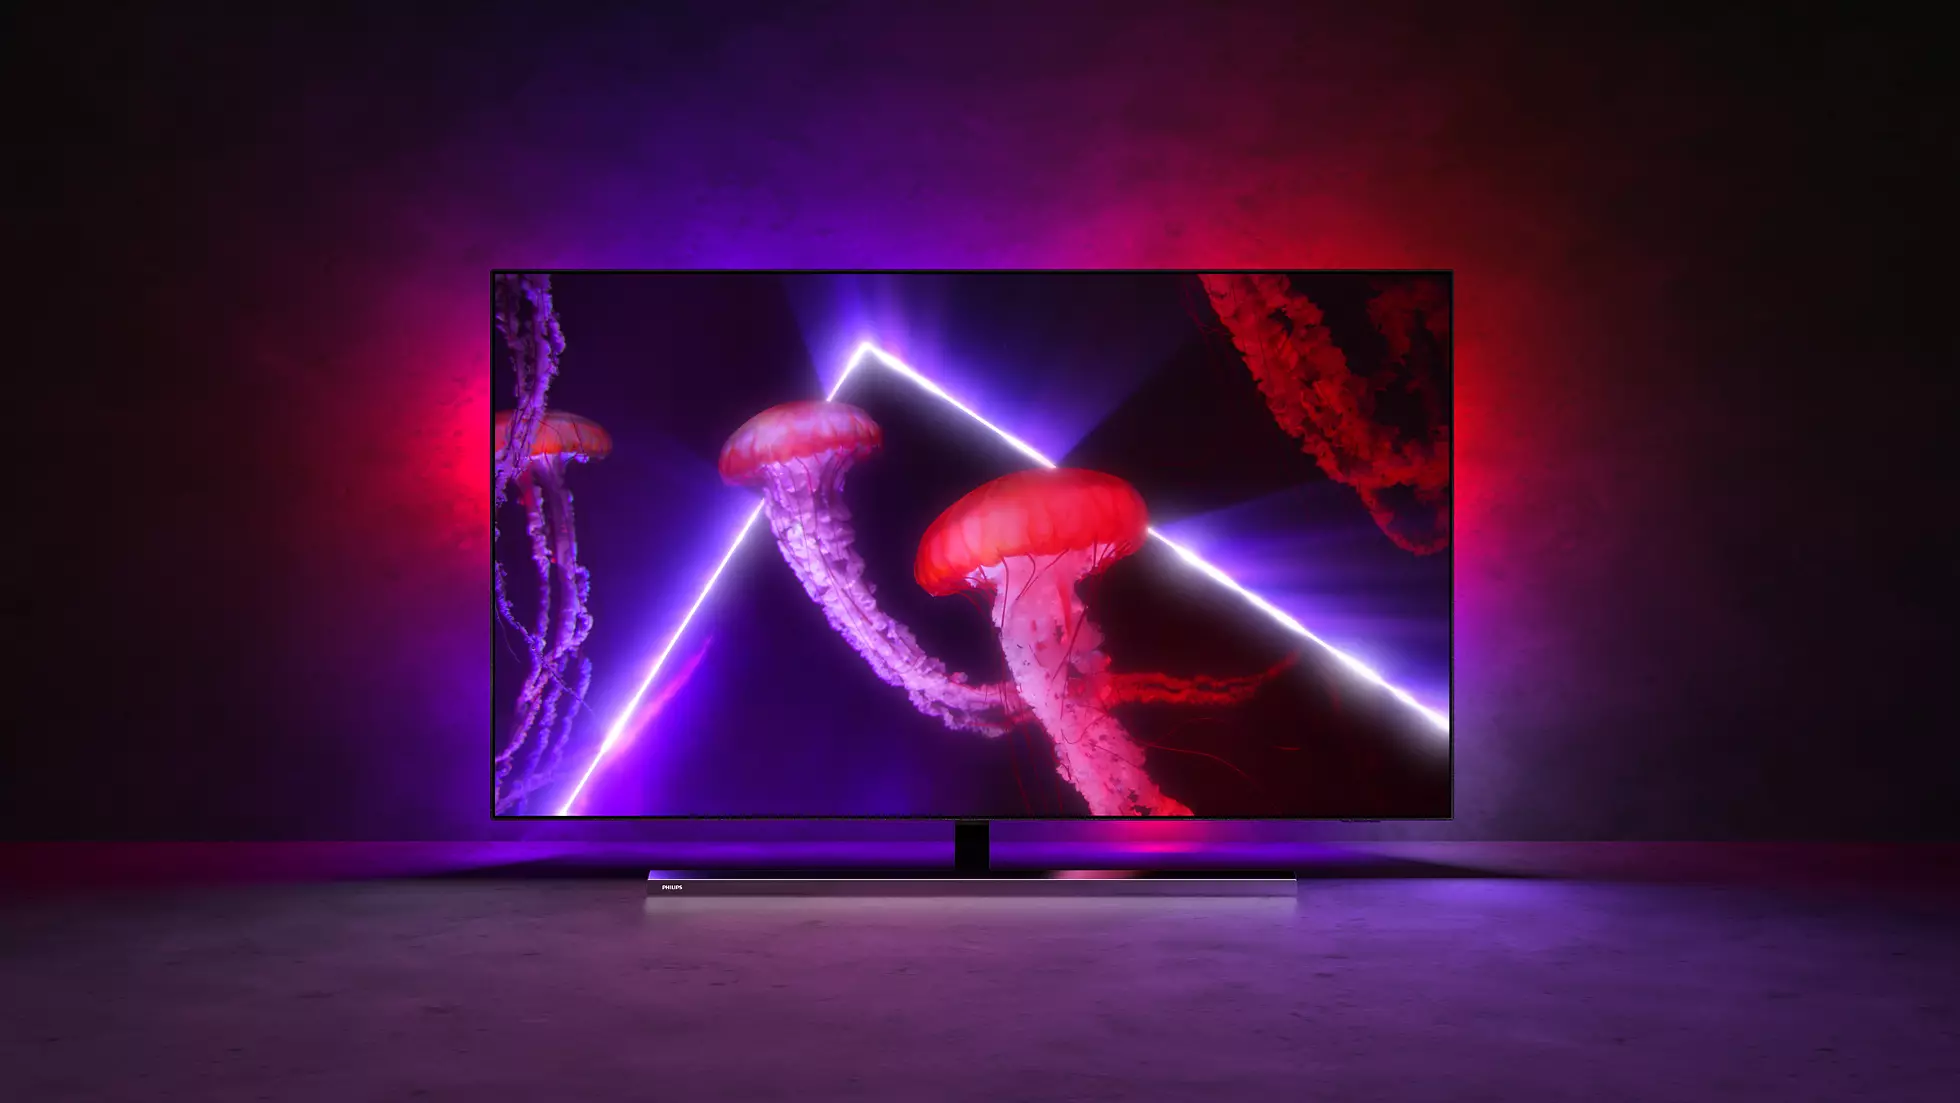 Android TV 11 en un Philips OLED 807 - Vídeo Dailymotion